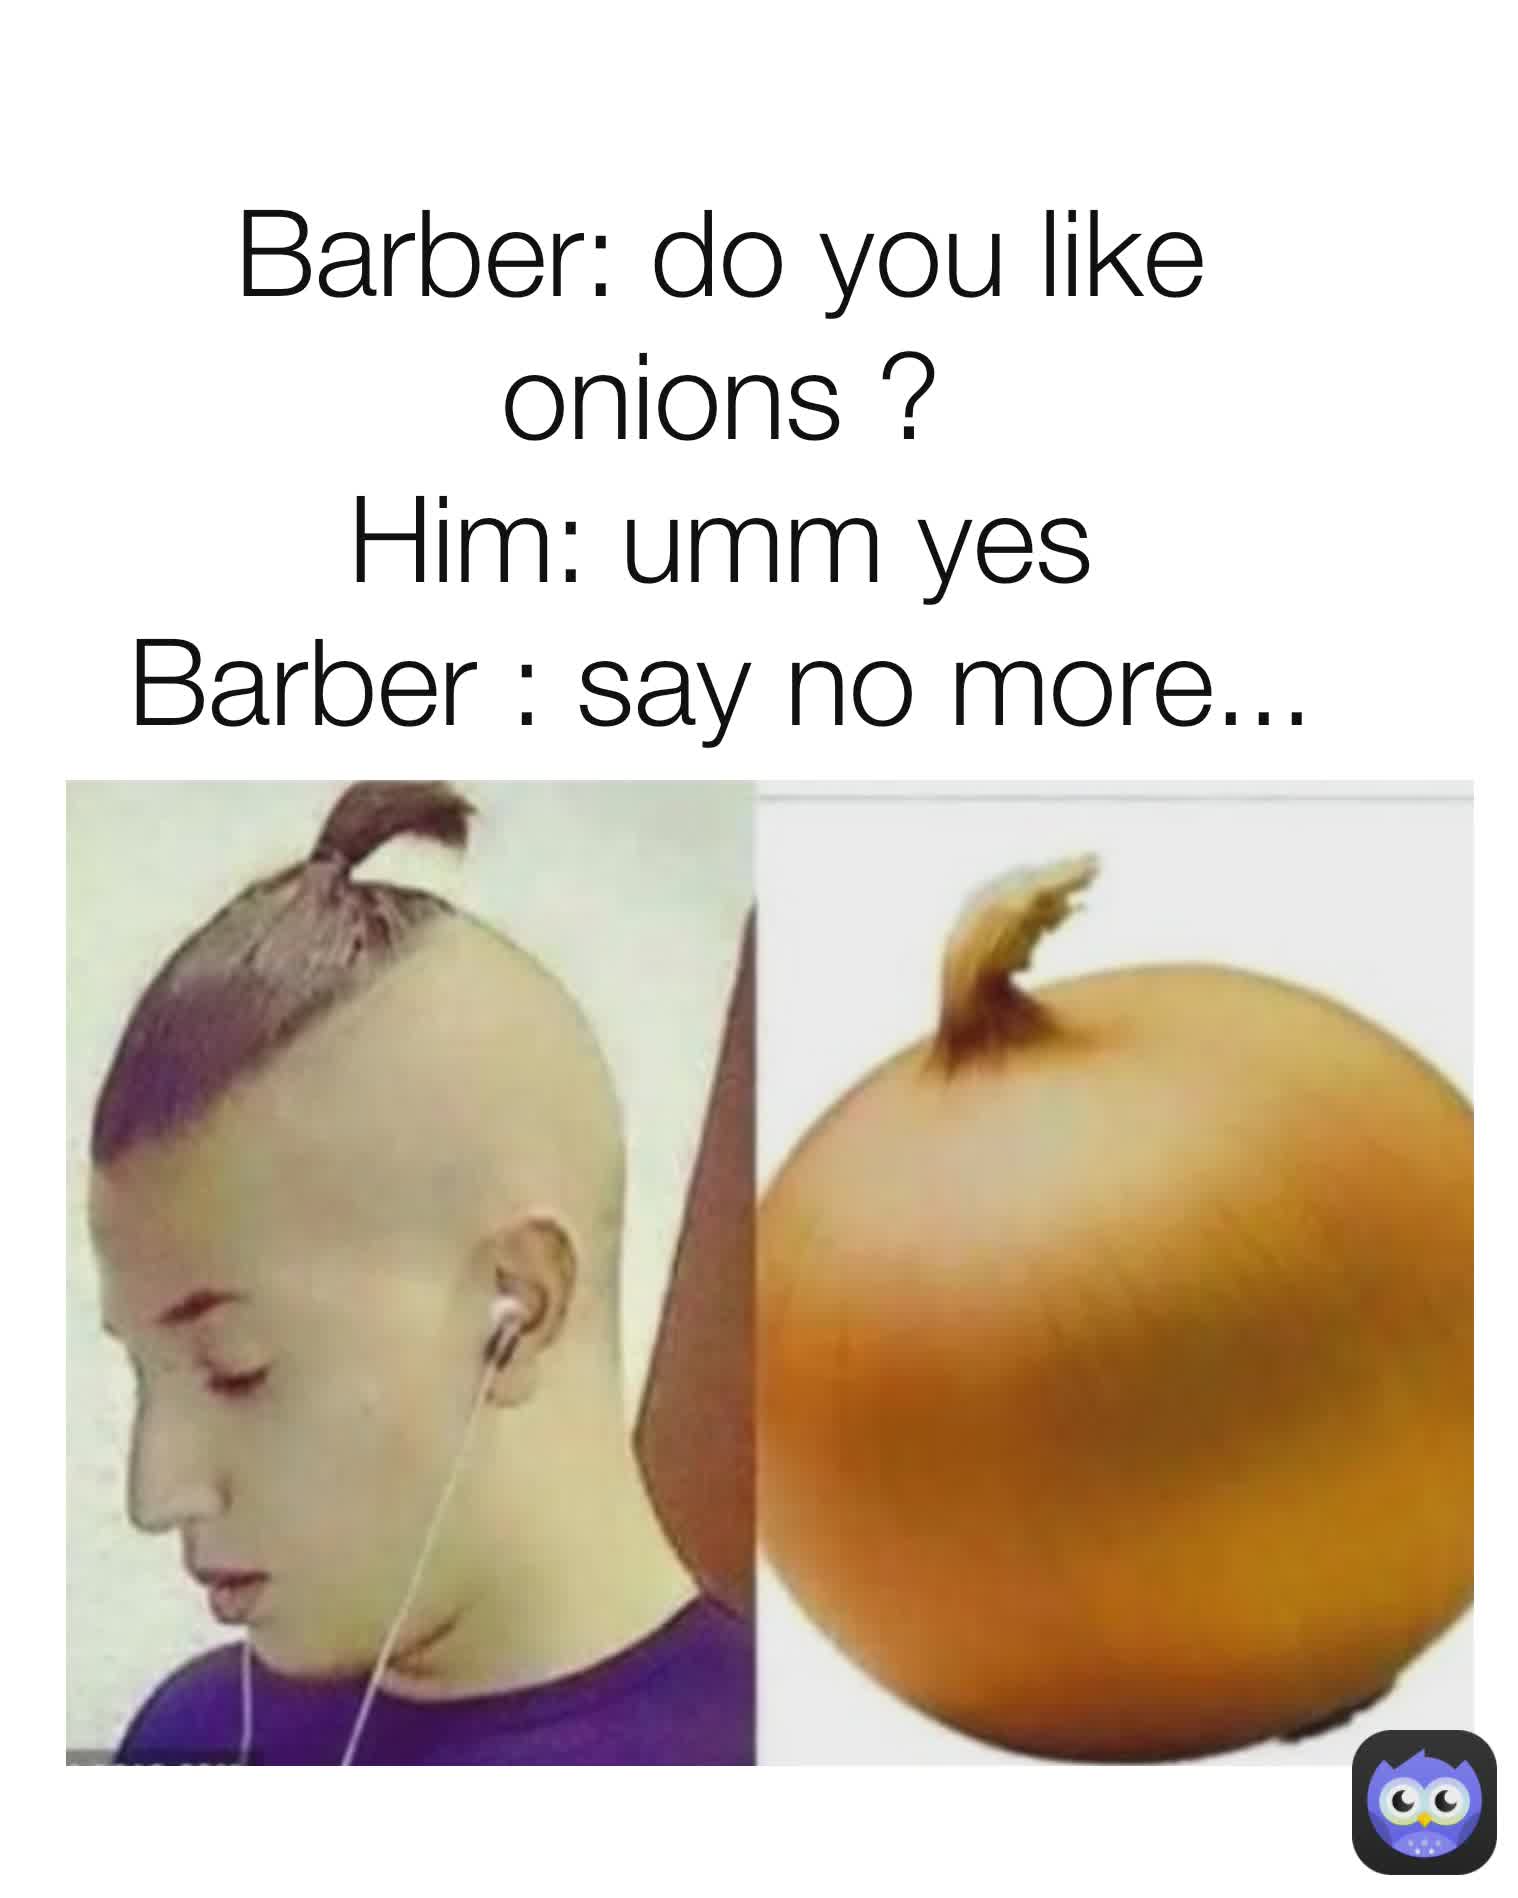 Barber: do you like onions ?
Him: umm yes
Barber : say no more...